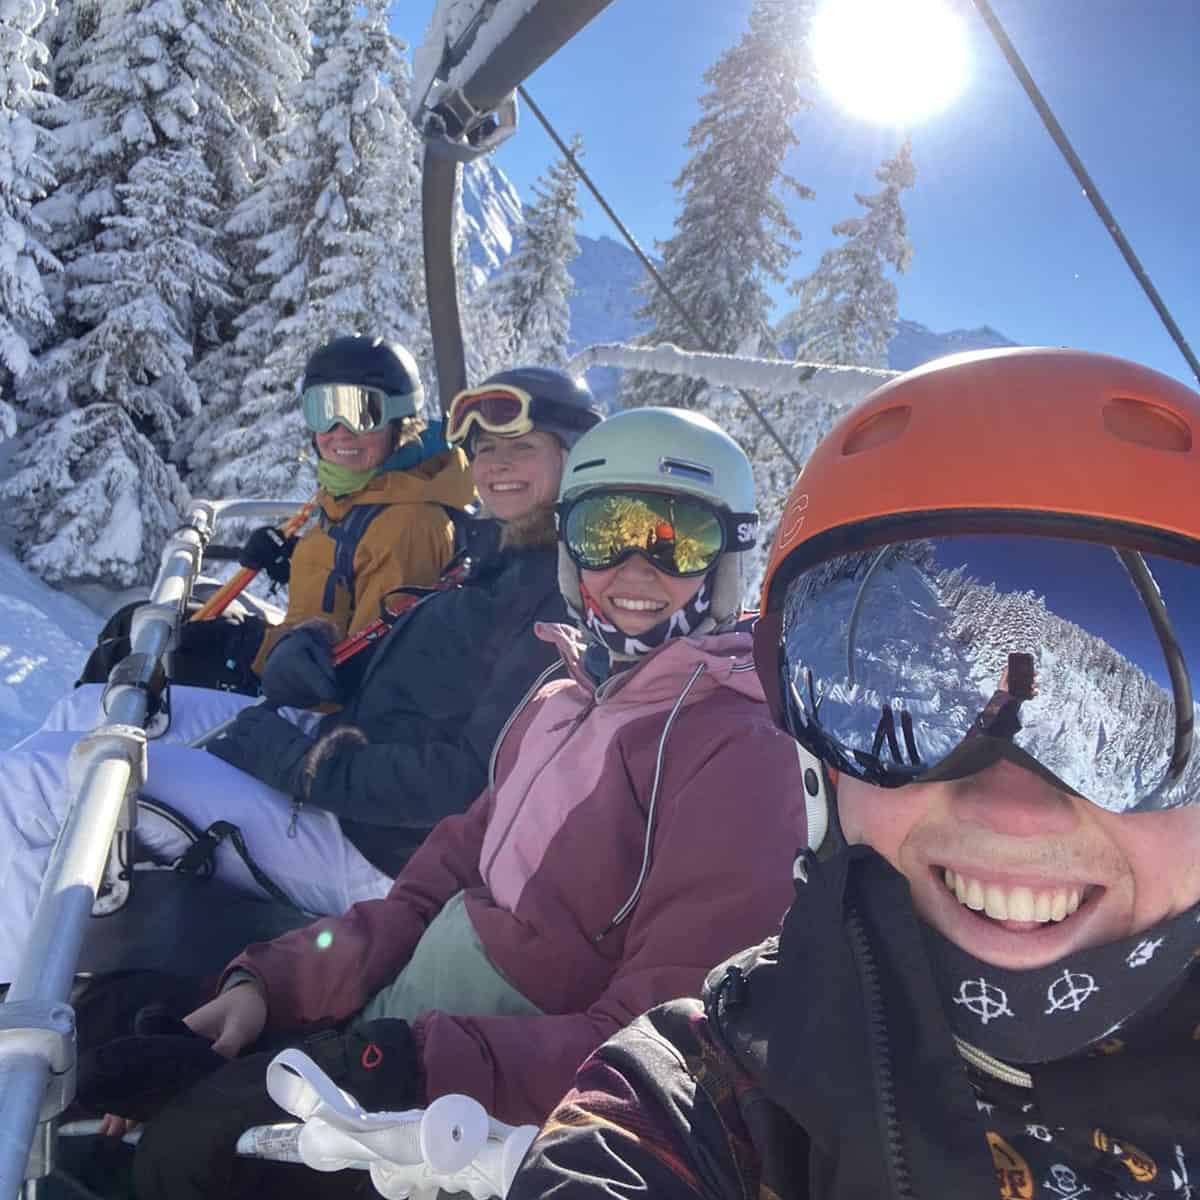 pchalet team on chairlift